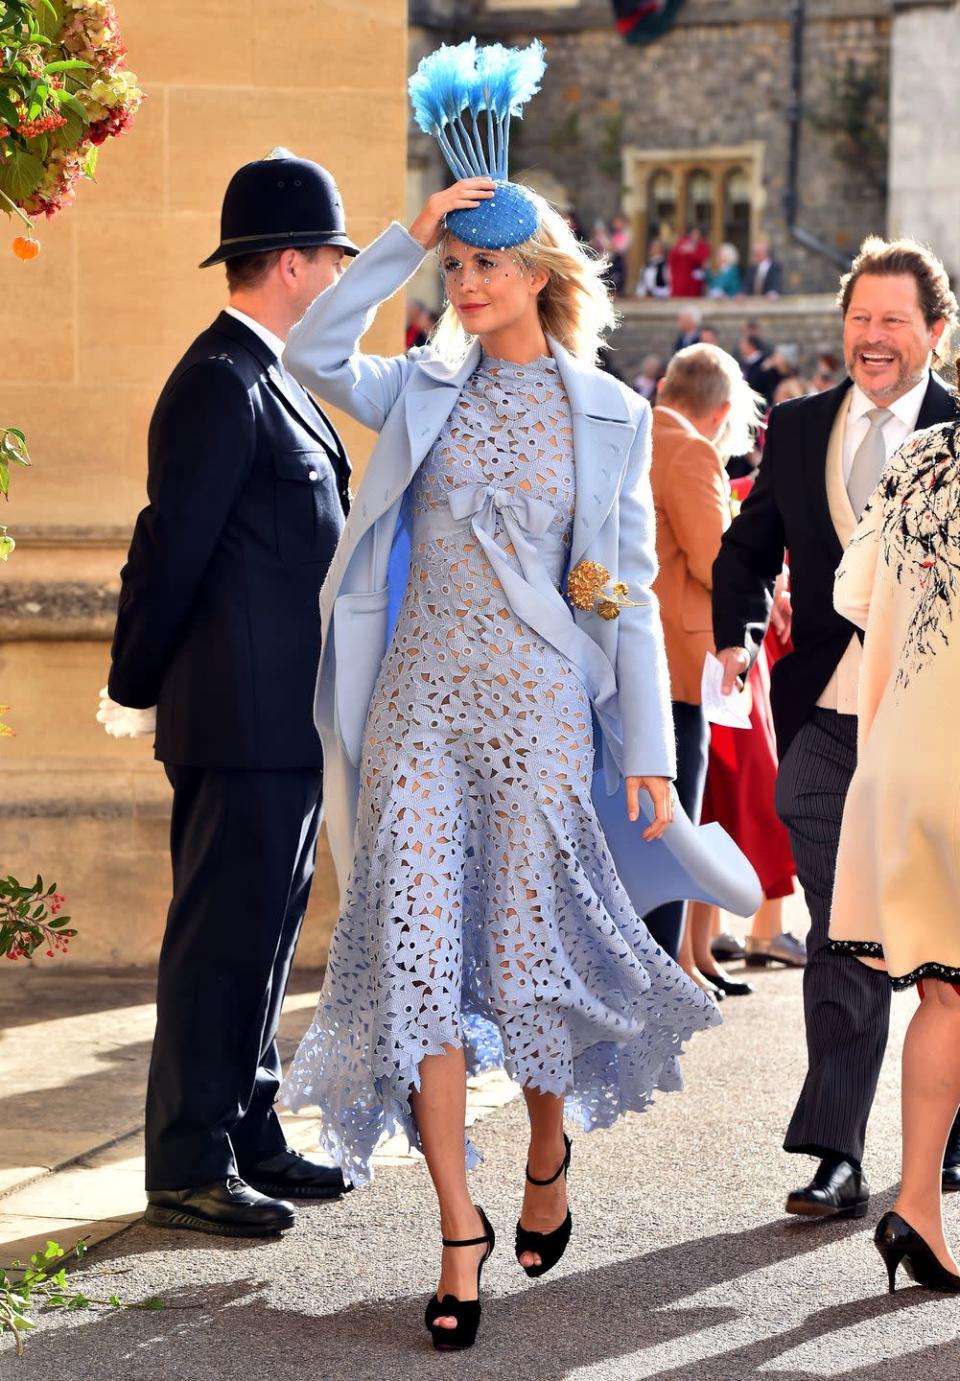 <p>Poppy Delevingne's pastel blue coat and lace dress combo complimented her blonde hair and bright red lip perfectly on Princess Eugenie and Jack Brooksbank's wedding day. </p>